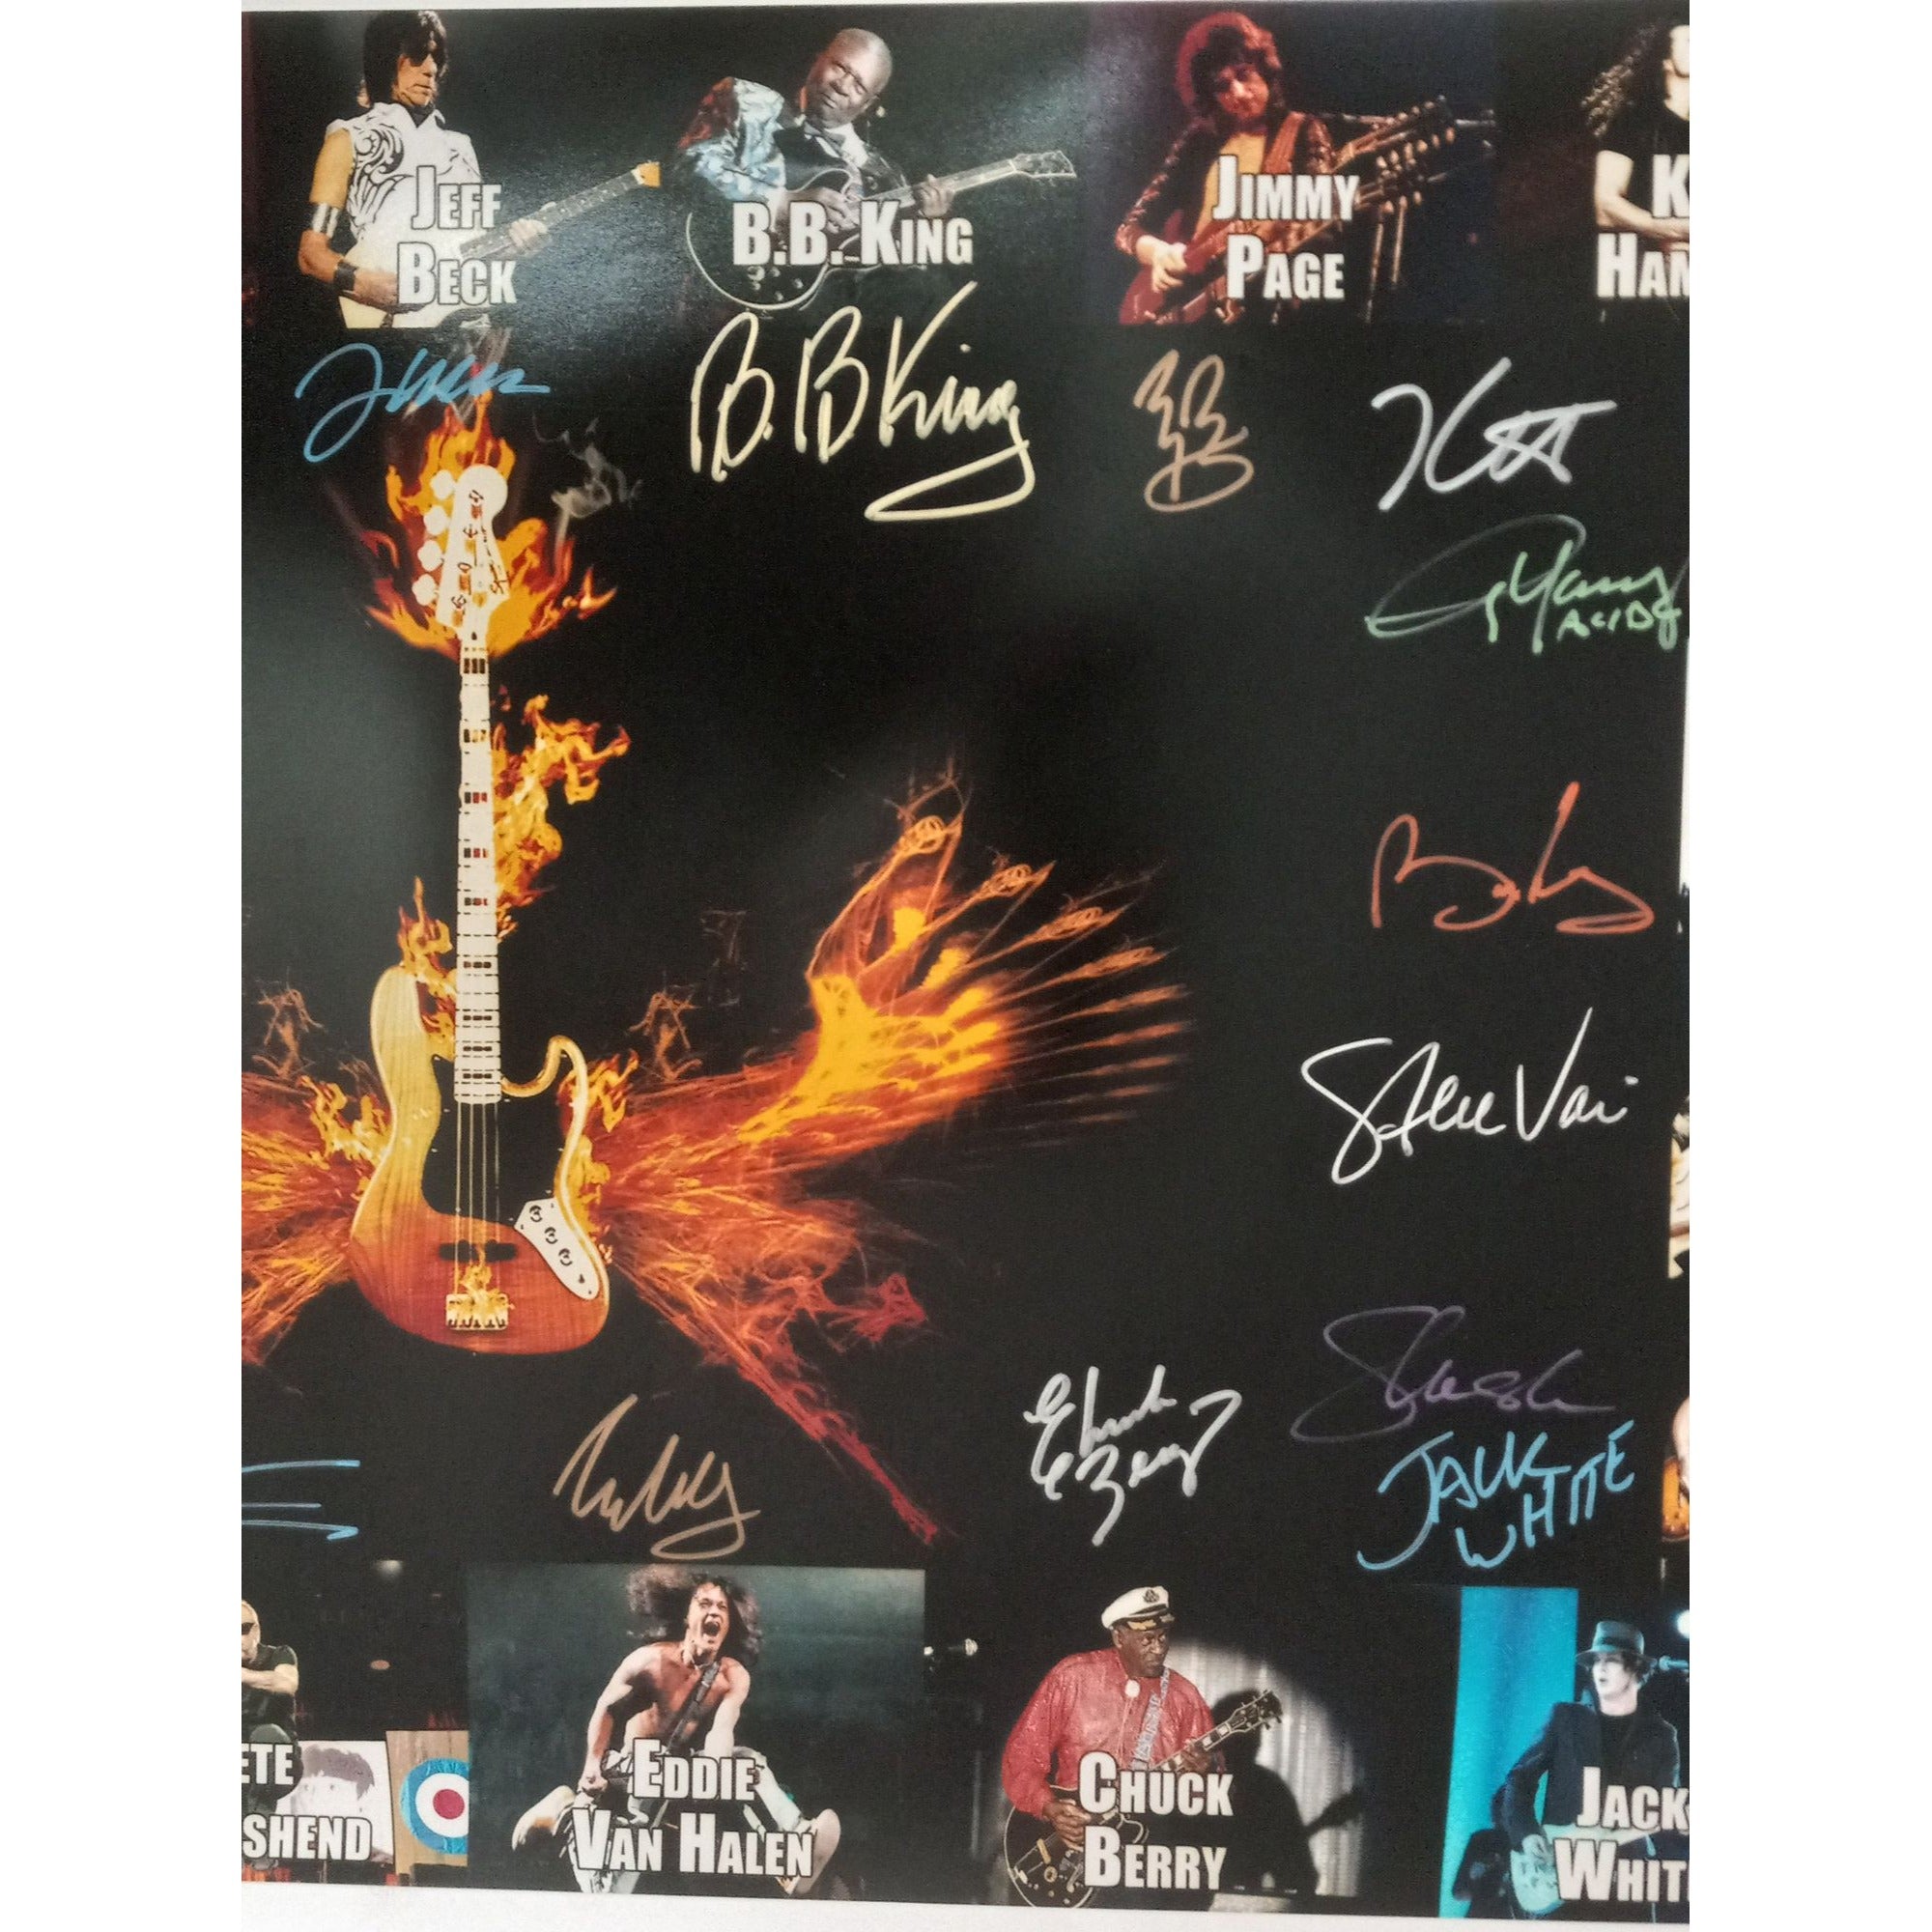 David Gilmour, Jimmy Page, Eddie Van Halen, 20x30 photo signed by 20 guitar legends signed with proof